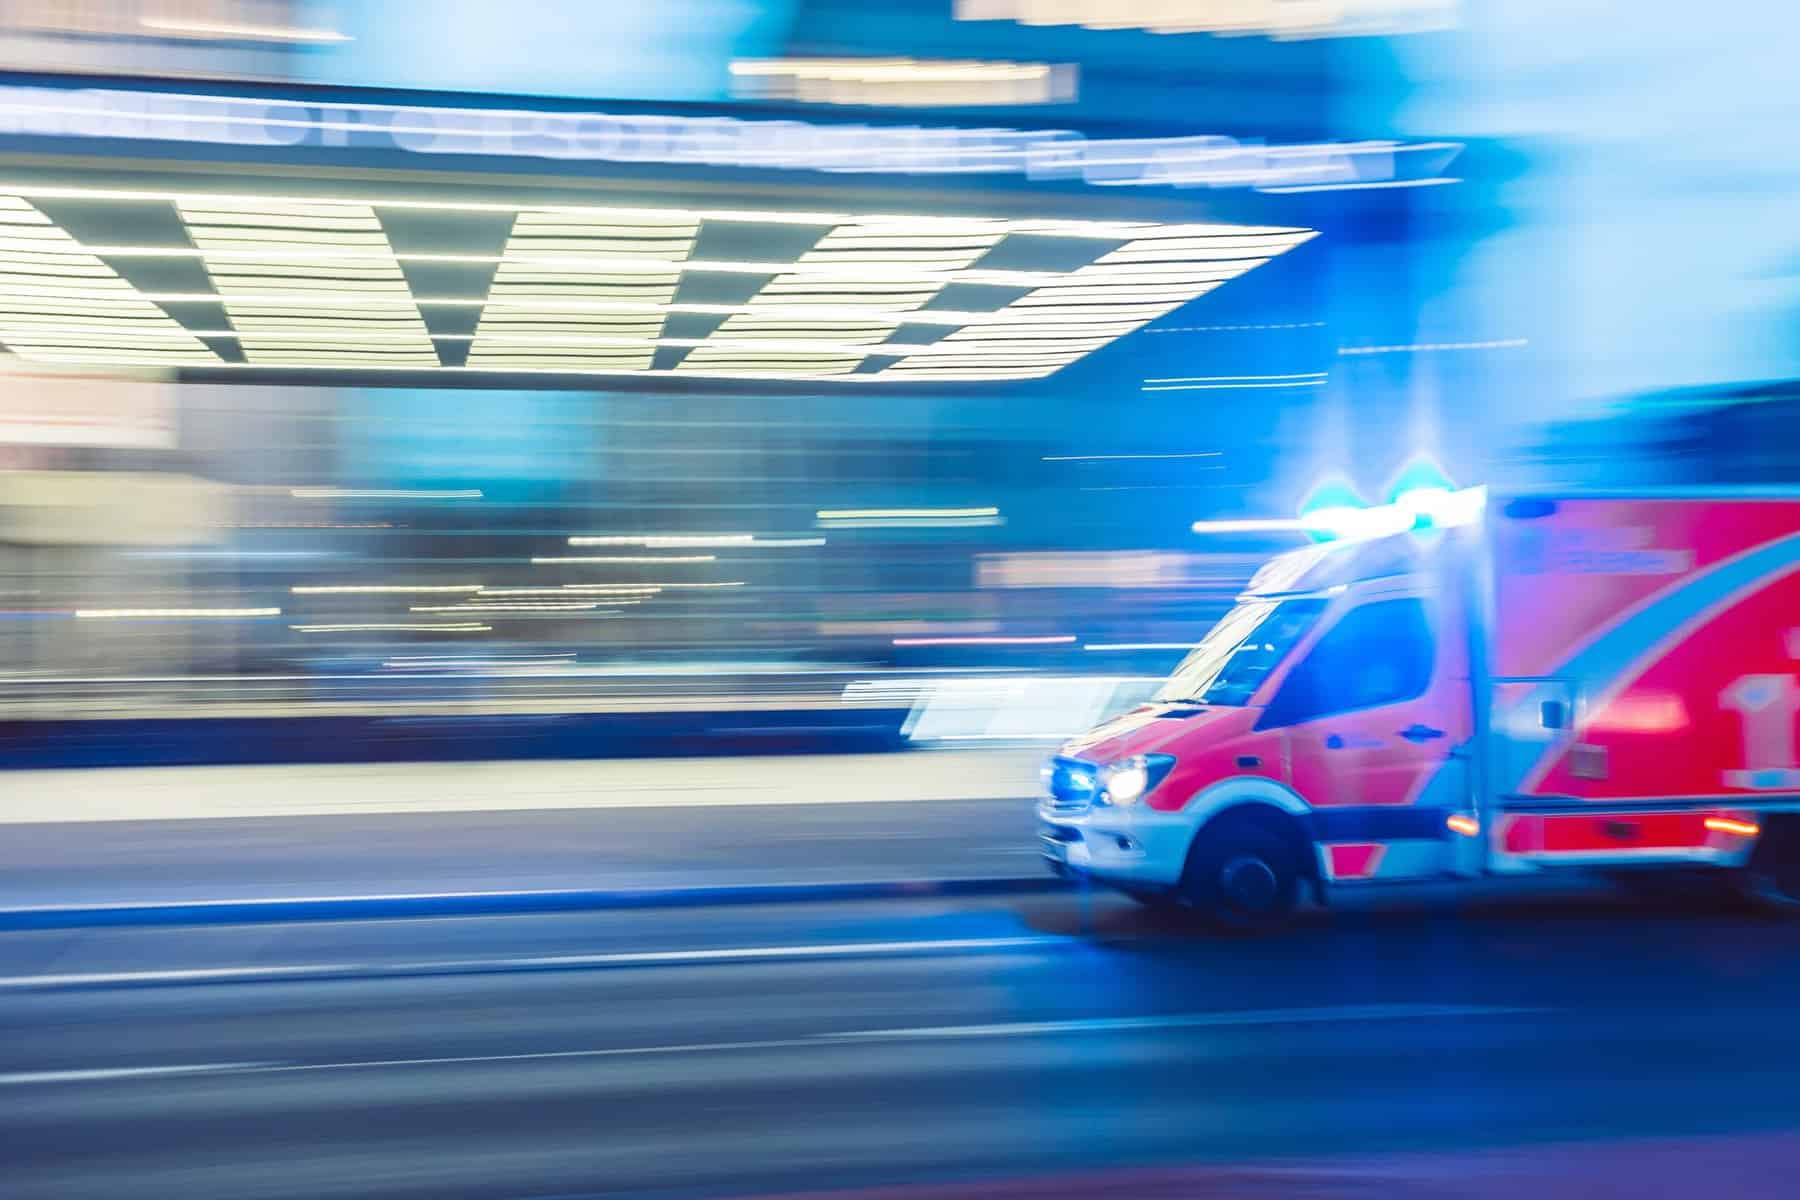 The front end of a red ambulance is seen on image right speeding past a blurred building.